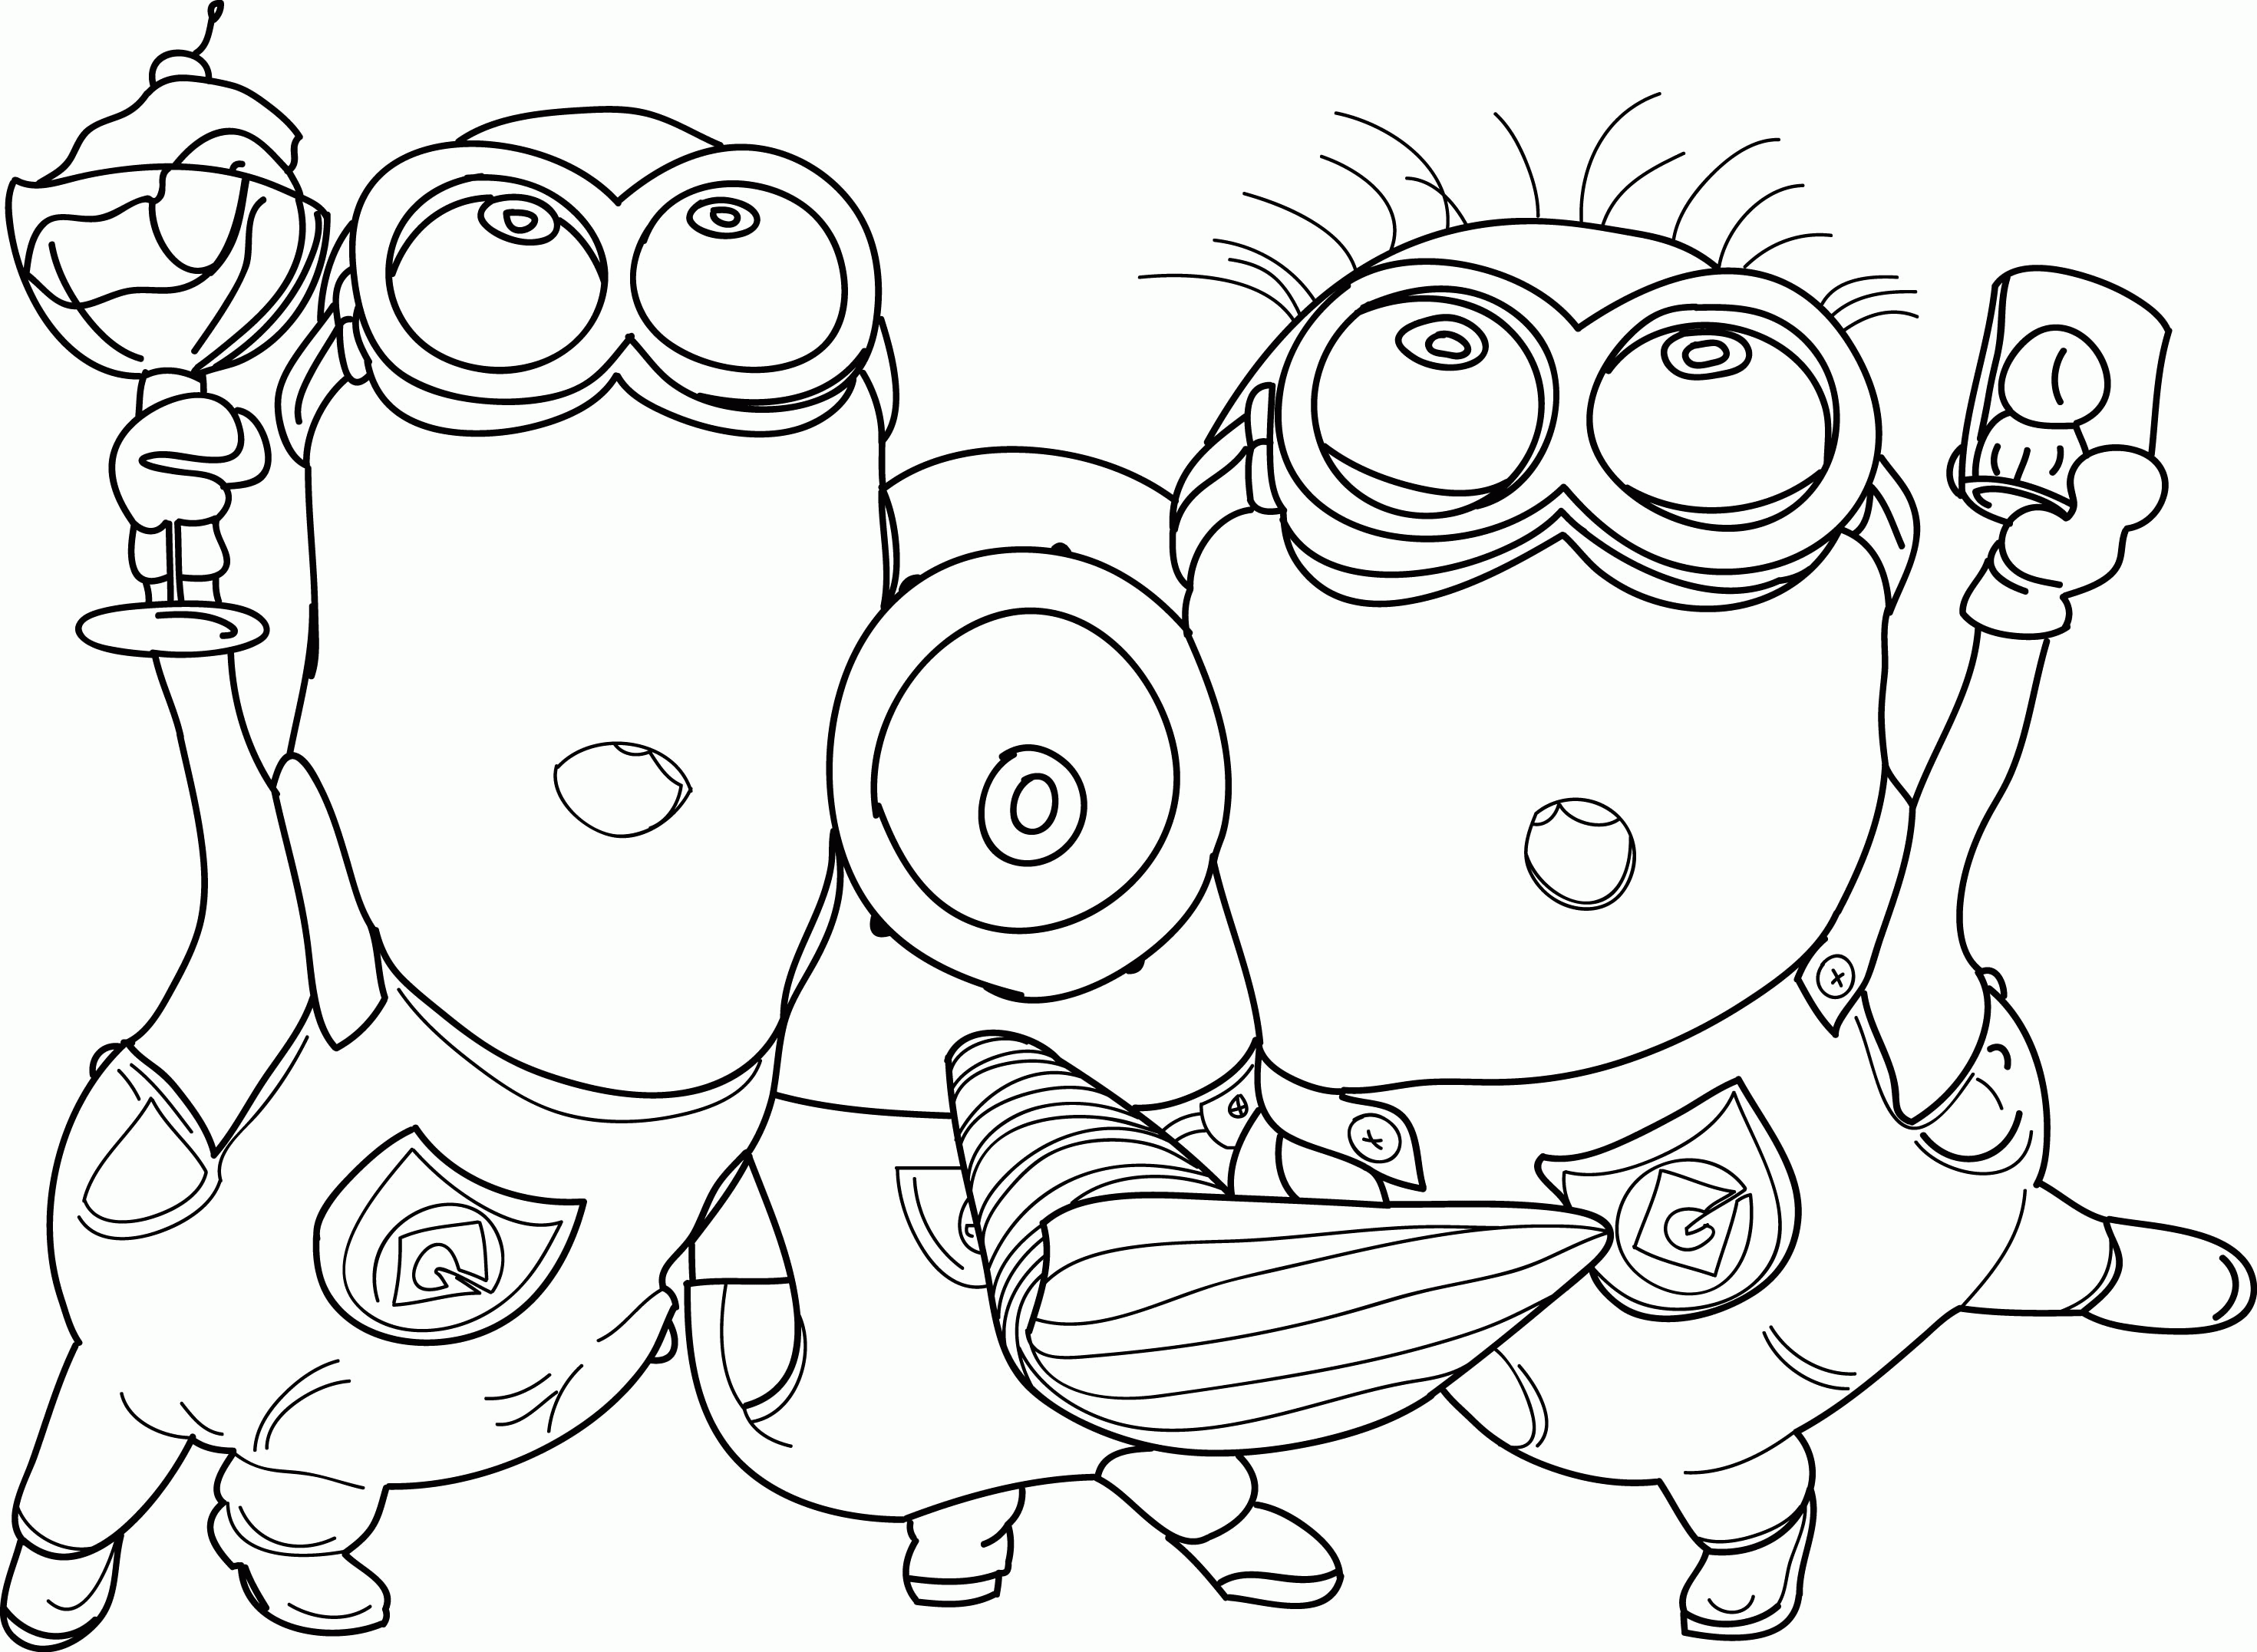 Despicable Me 2 Minions Party Time Coloring Page | 